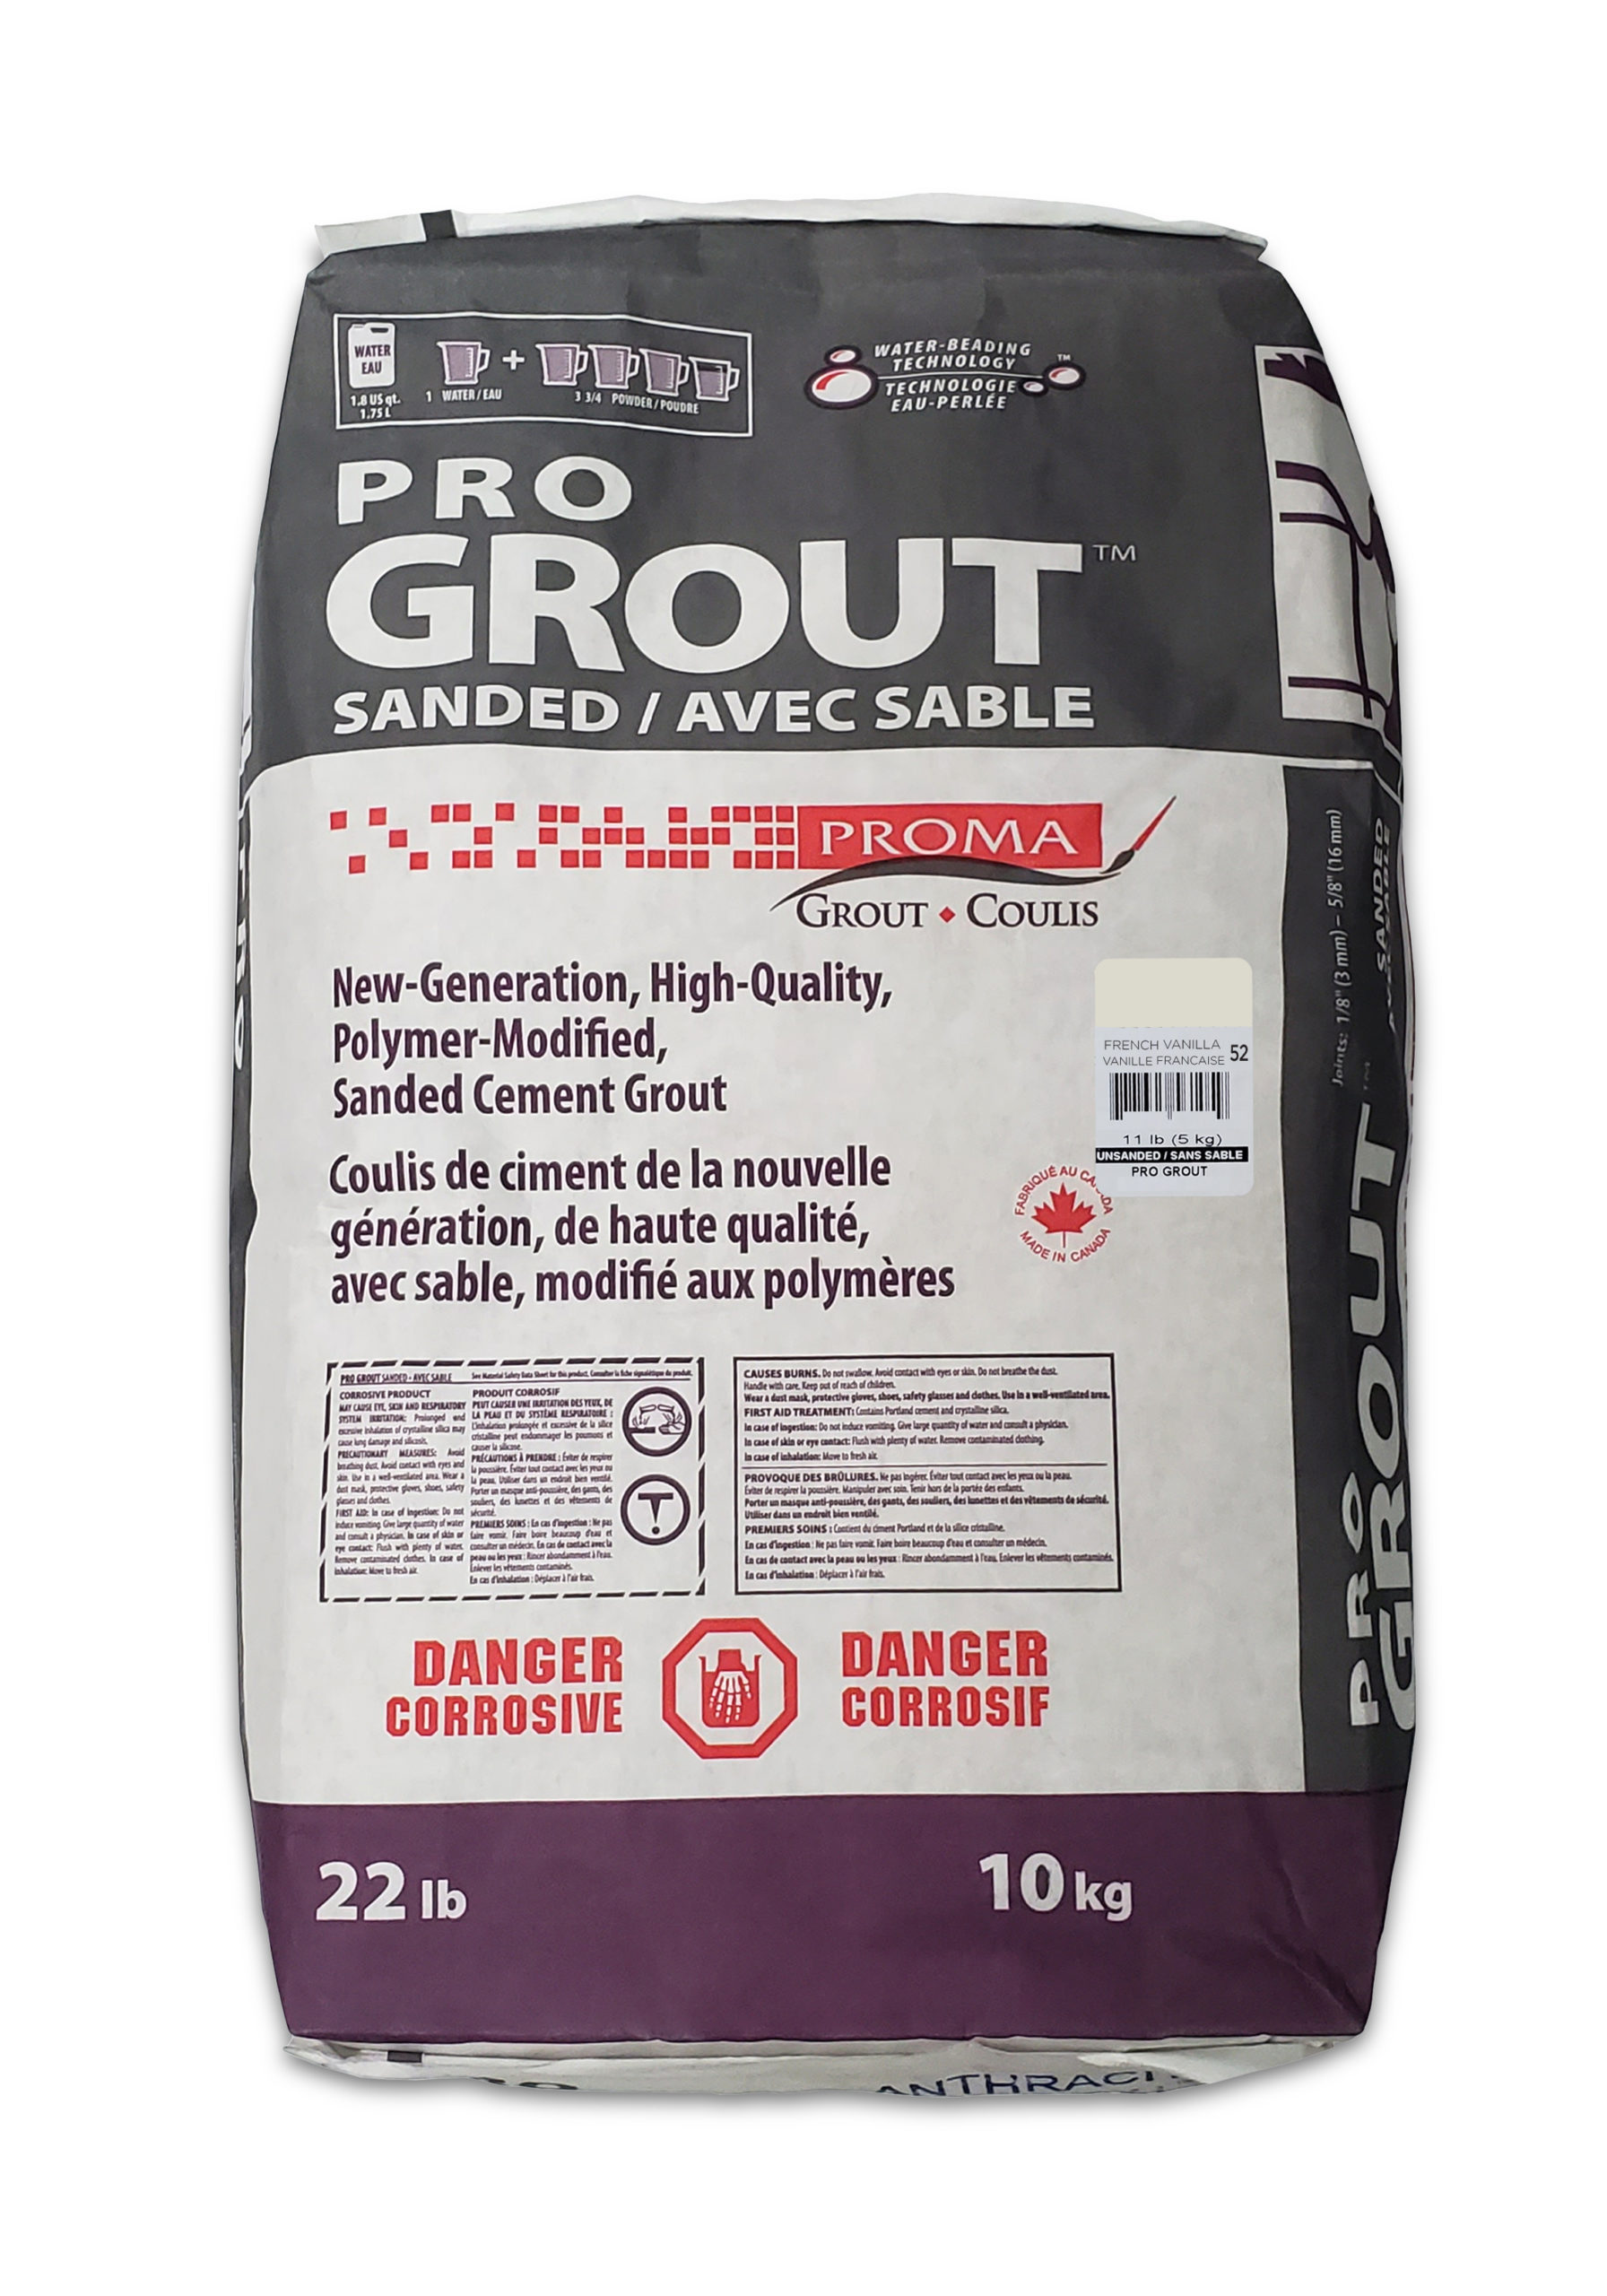 Pro Grout – Sanded_French Vanilla_10kg_22lb